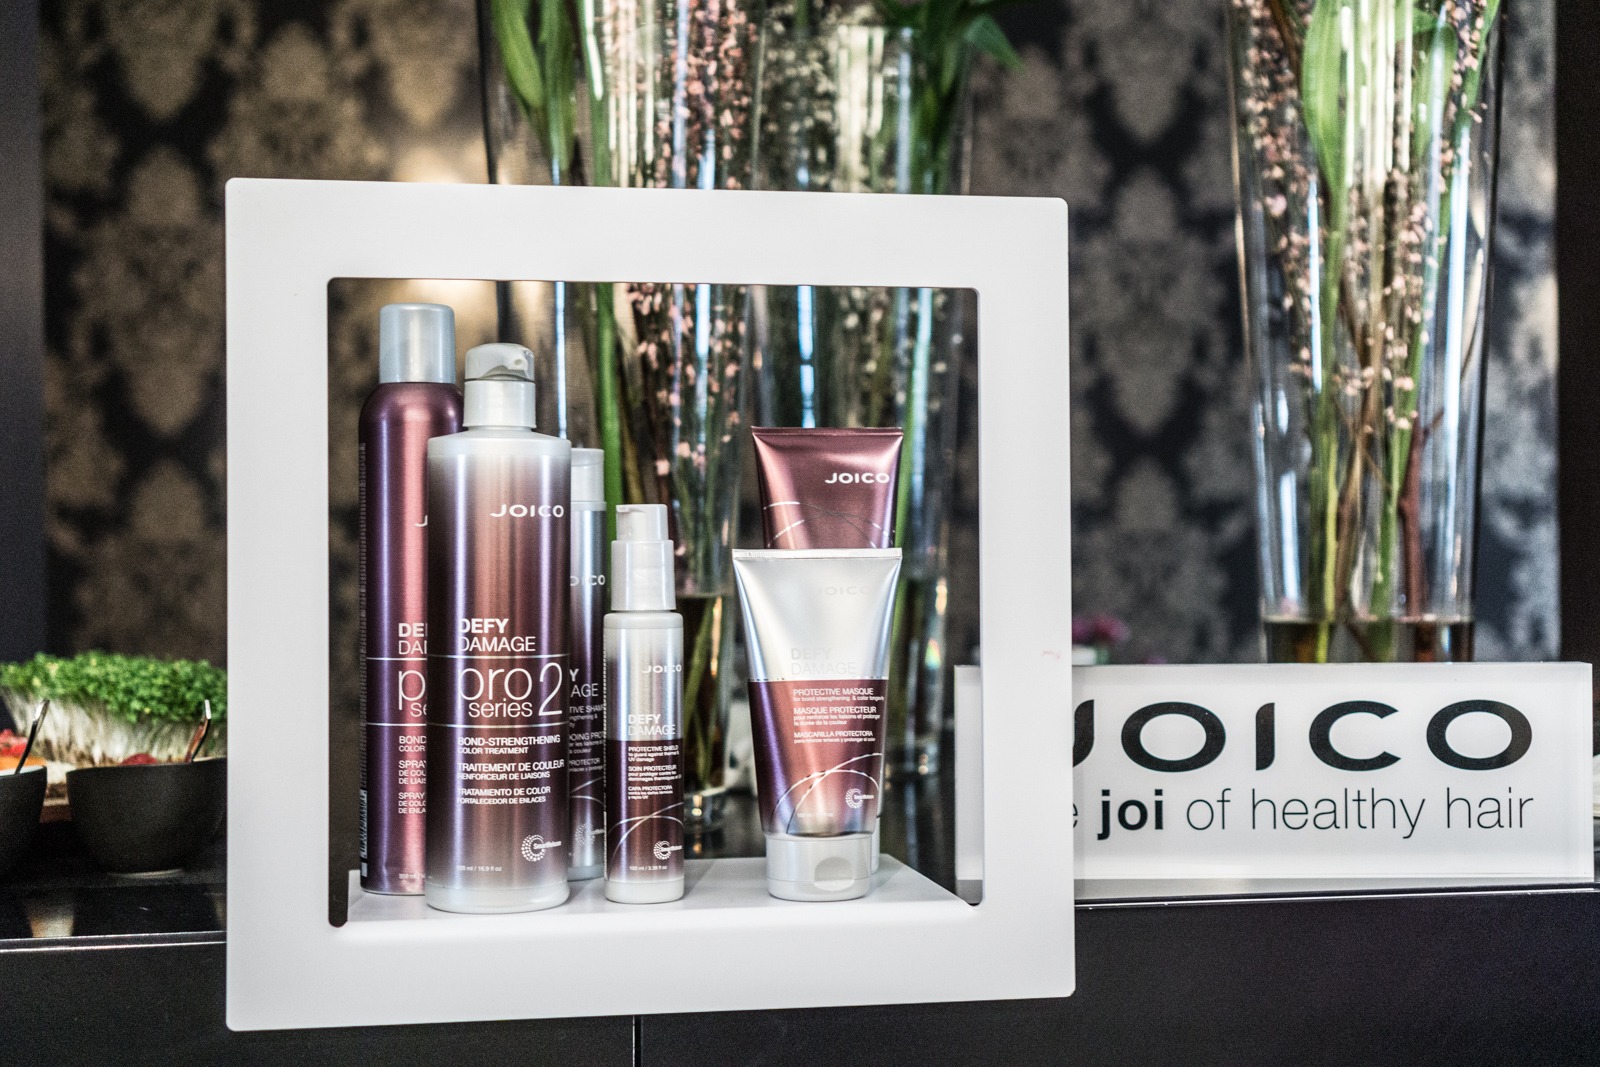 A Day in Berlin with JOICO defy damage